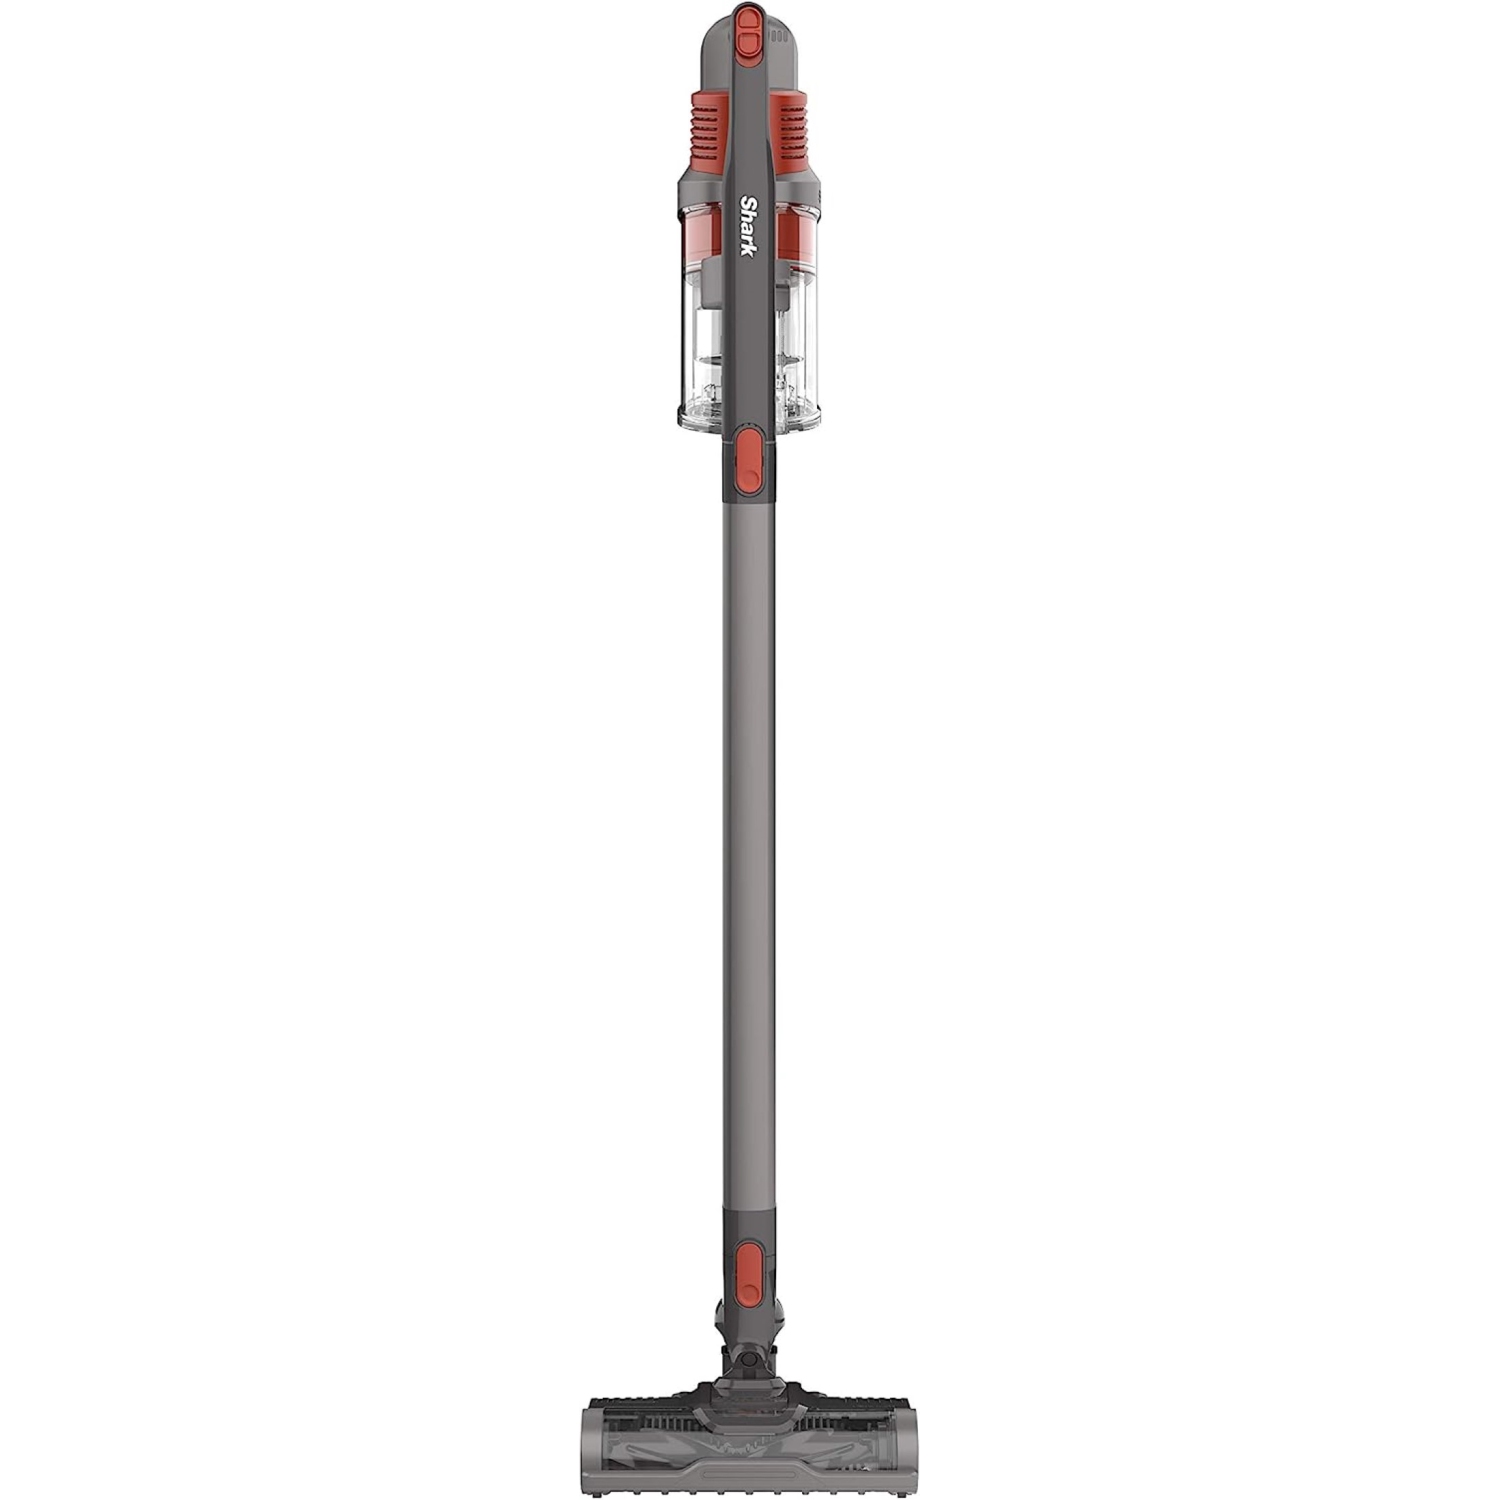 Shark Rocket Lightweight Cordless Rechargeable Handheld Upright Stick Vacuum Cleaner with Crevice Tool & Duster Brush for Car Detailing, Terracotta (Canadian Version)